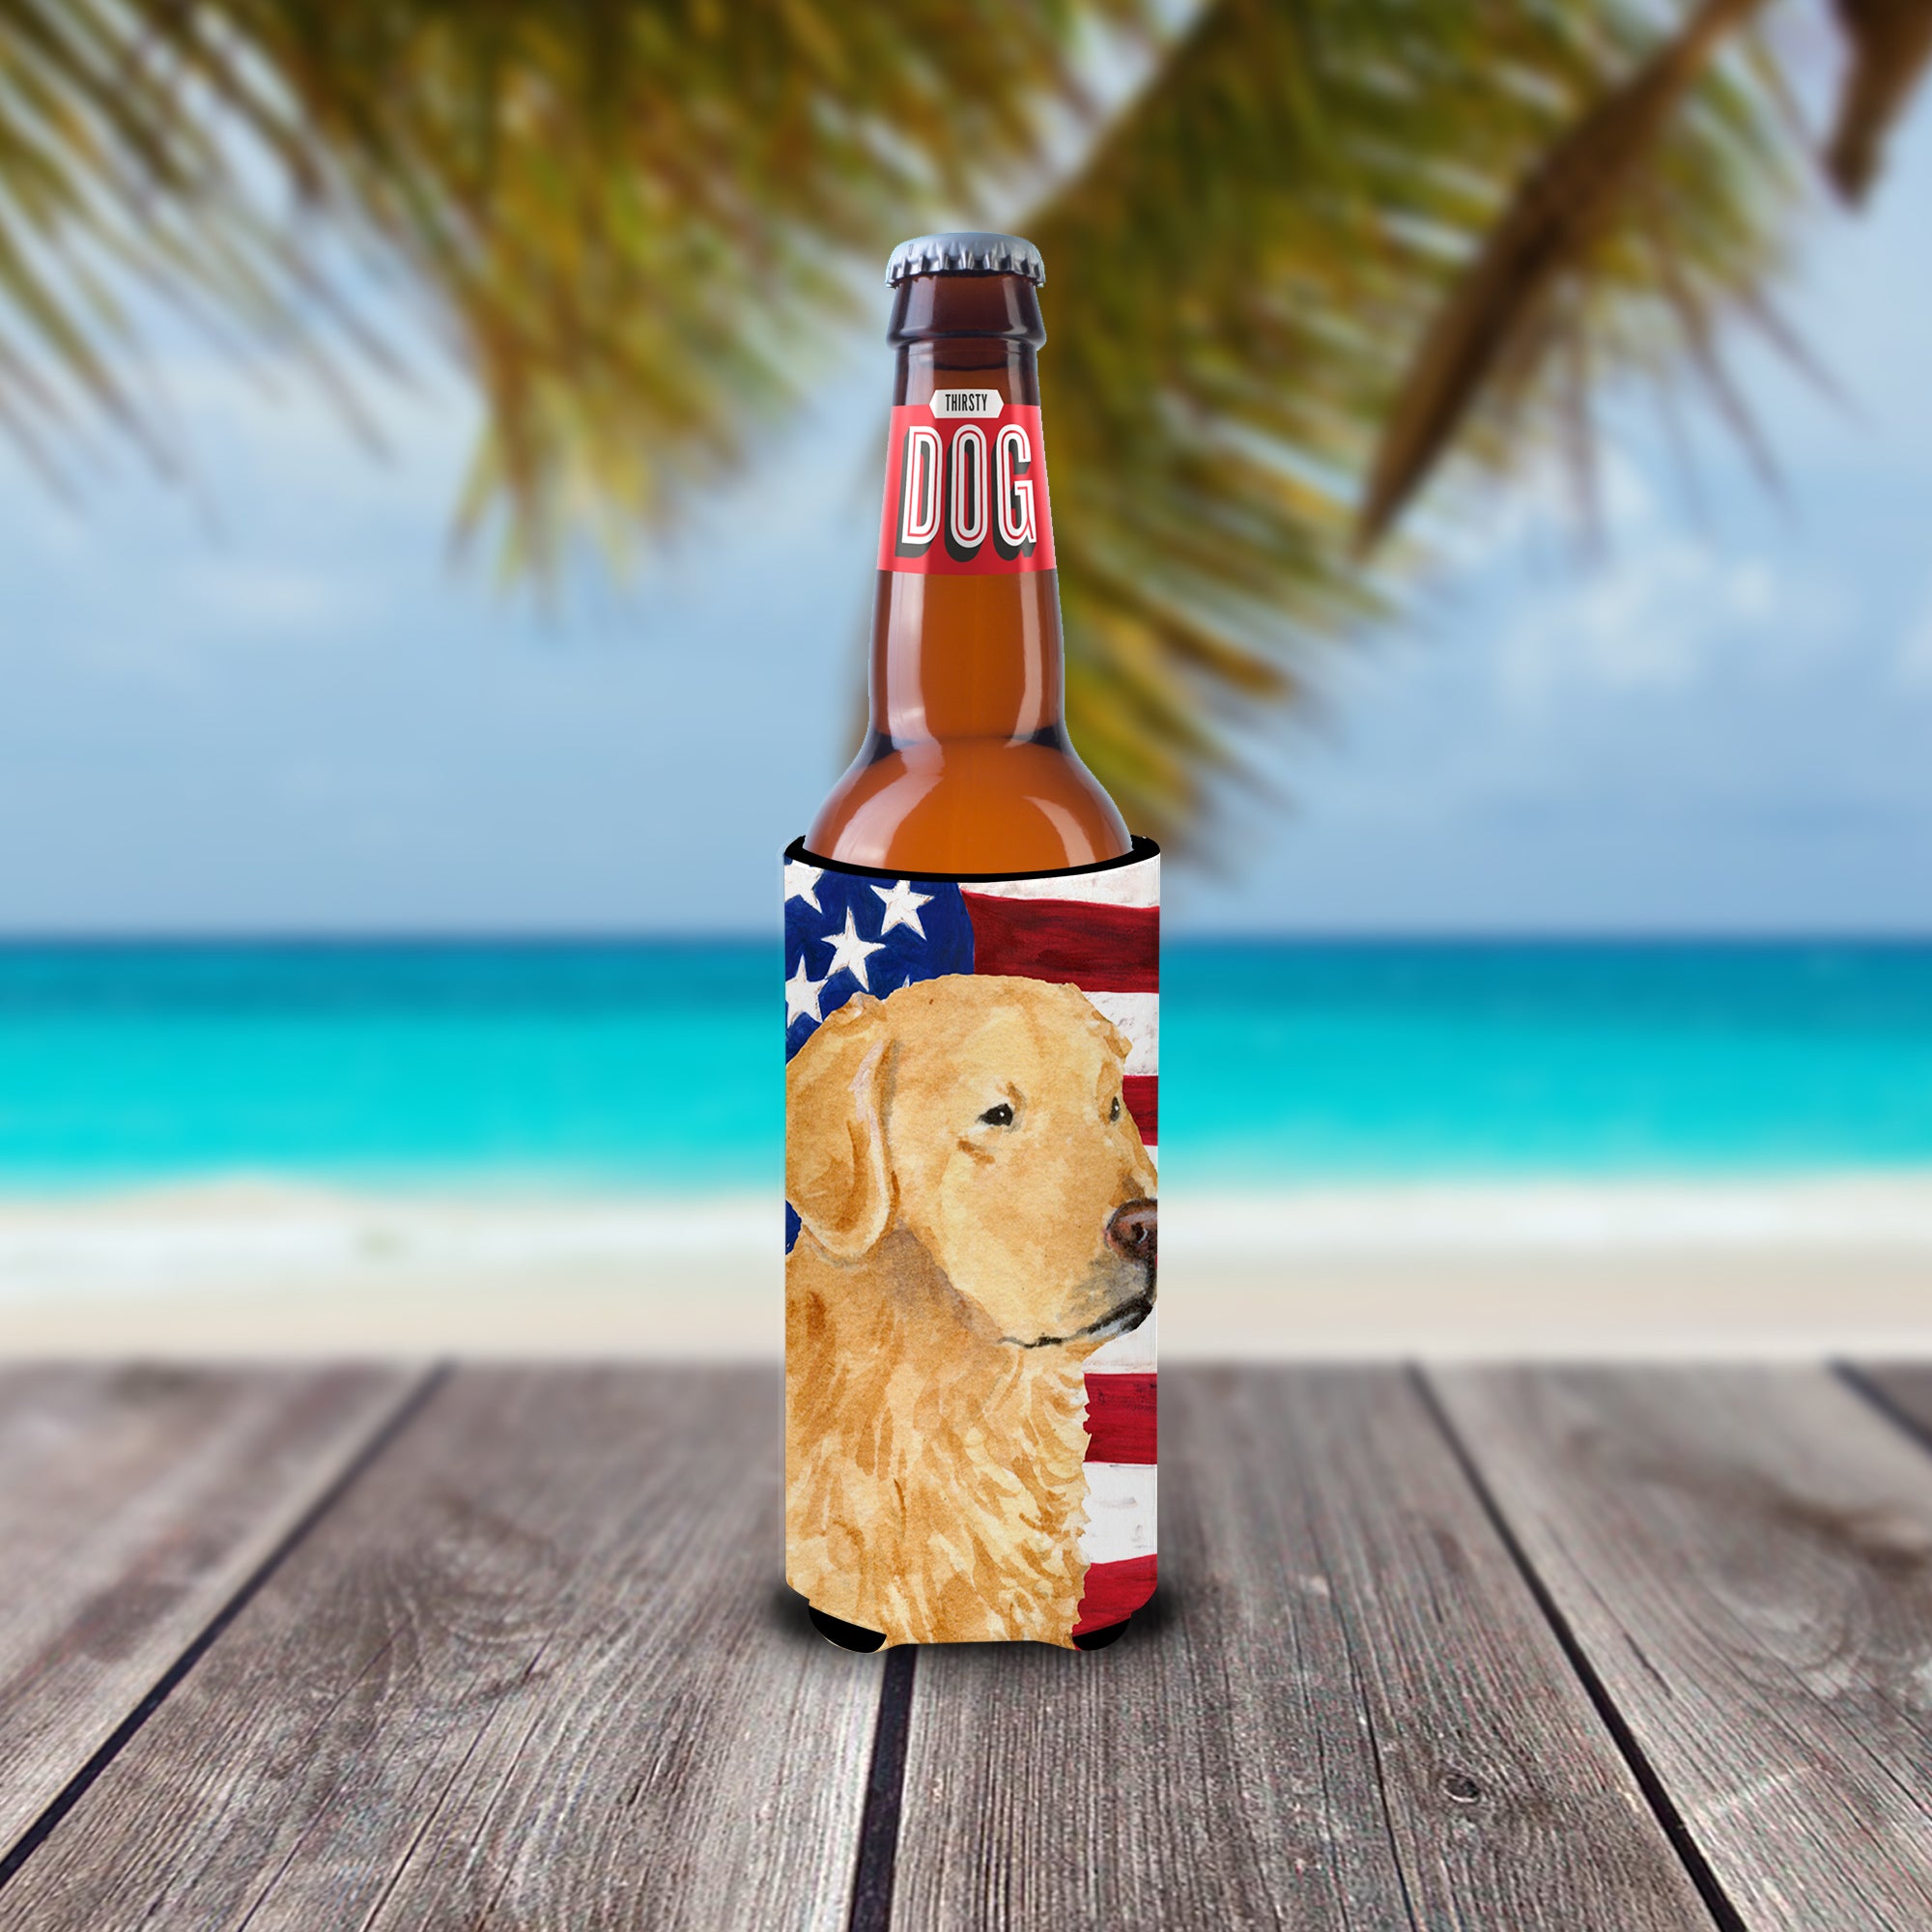 USA American Flag with Golden Retriever Ultra Beverage Insulators for slim cans SS4055MUK